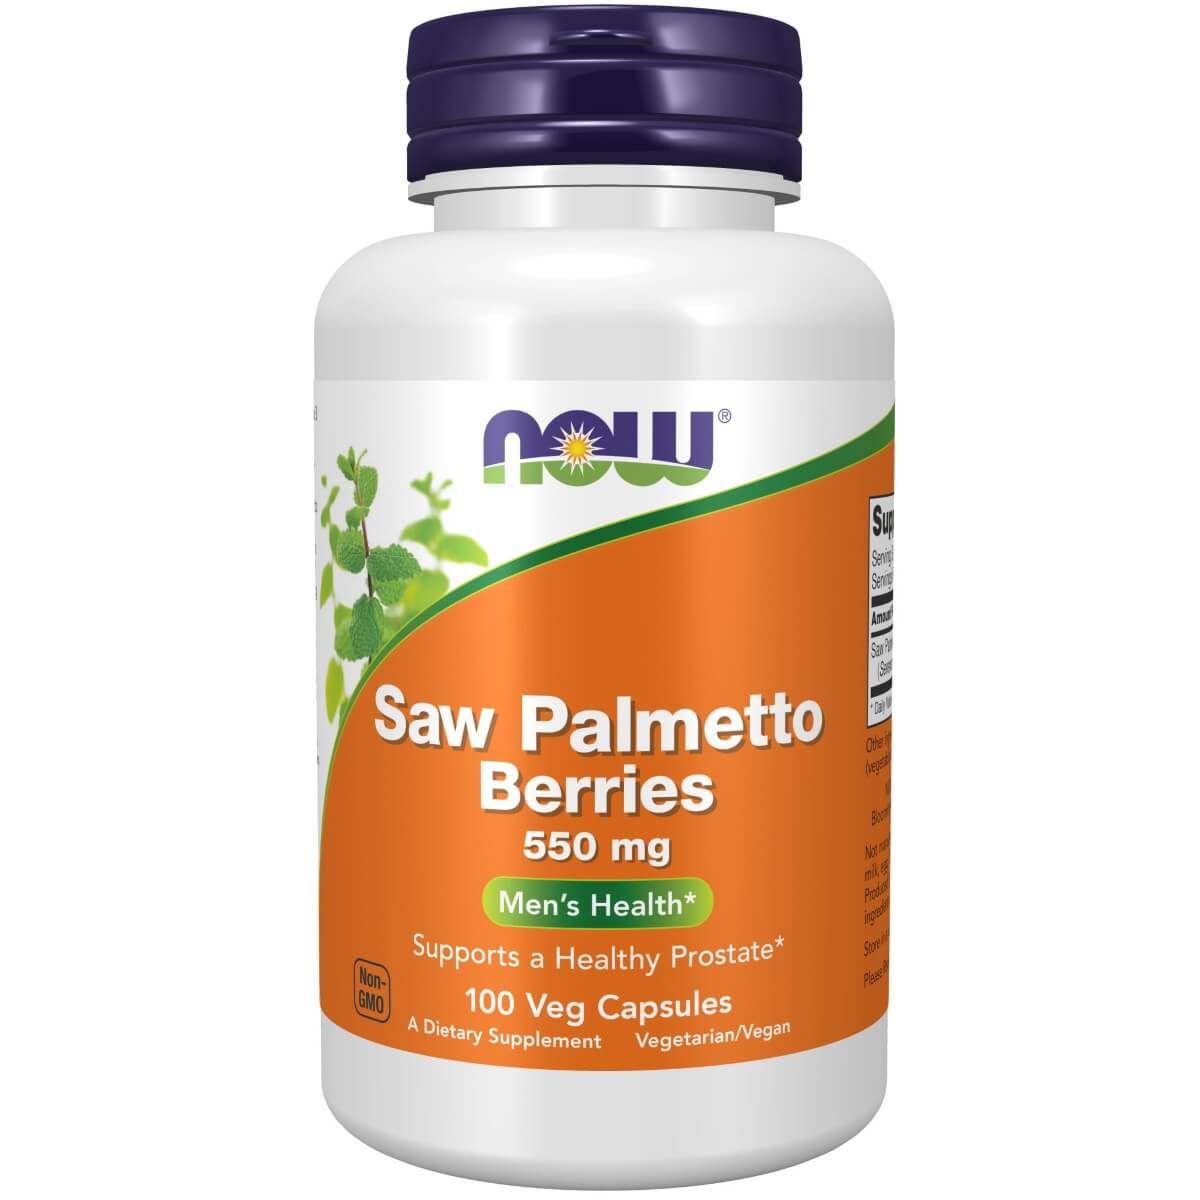 Photos - Vitamins & Minerals Now Foods Saw Palmetto Berries 550 mg 100 Veg Capsules PBW-P27912 